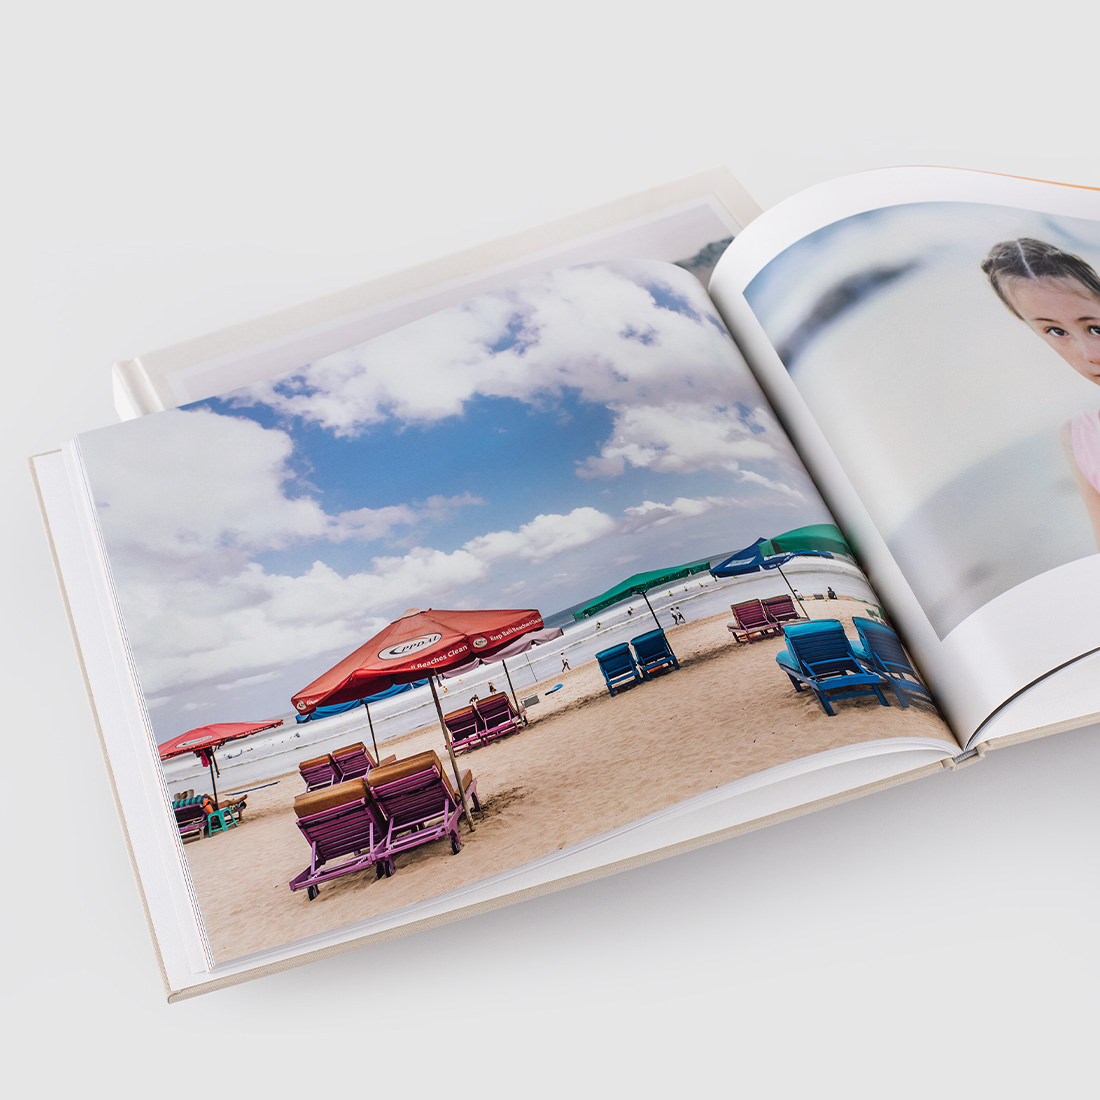 Open Classic Photo Book showing beach image